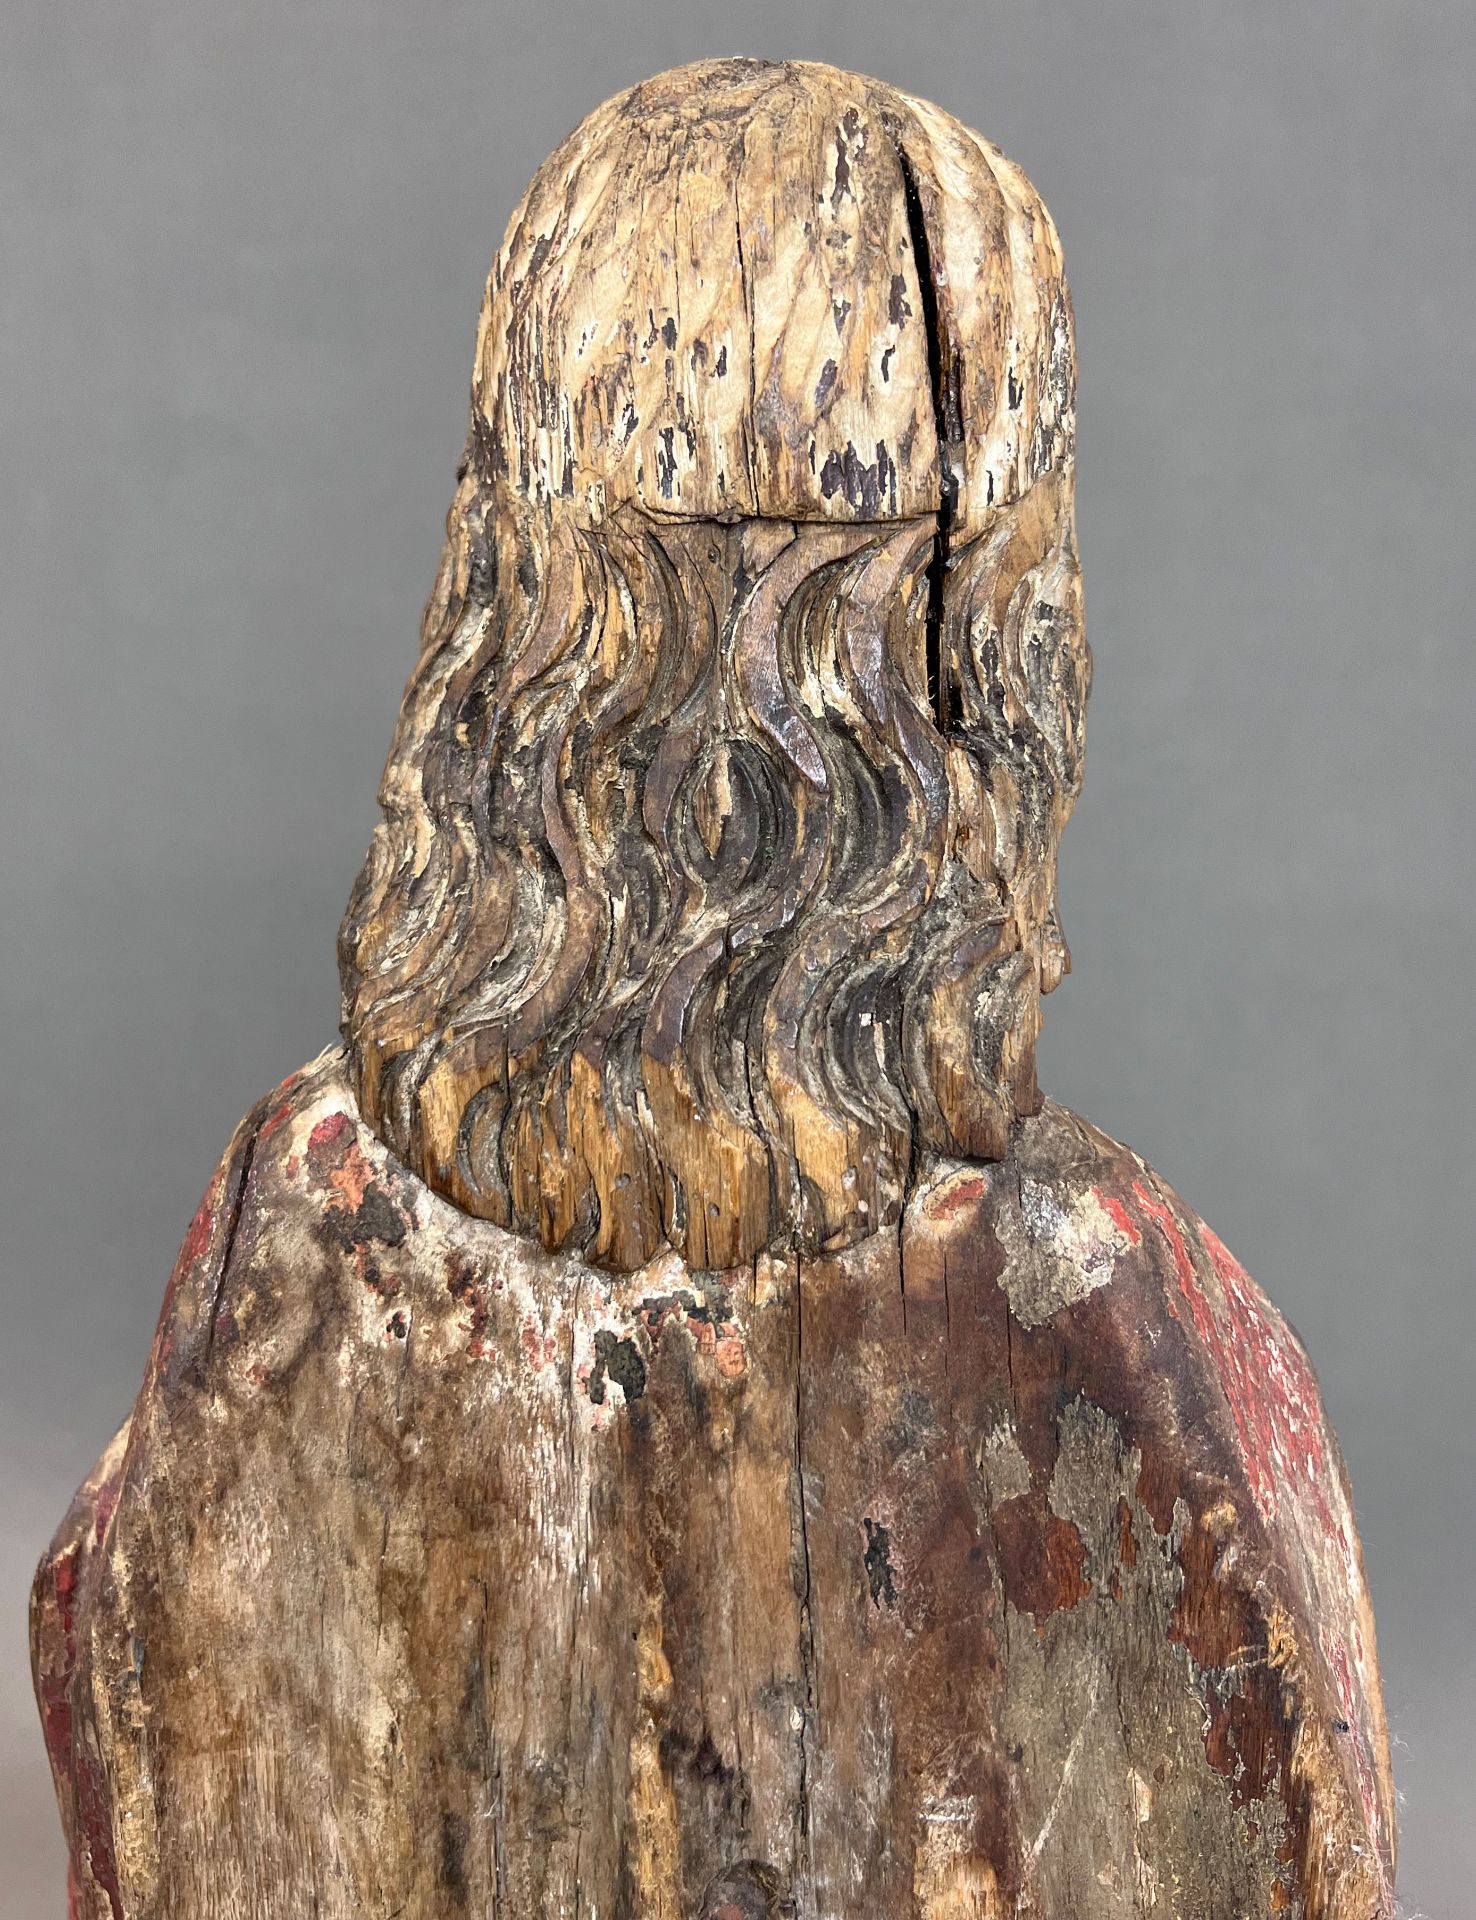 Wooden figure. Christ. Gothic style. Mid 15th century. Lower Rhine. - Image 6 of 15